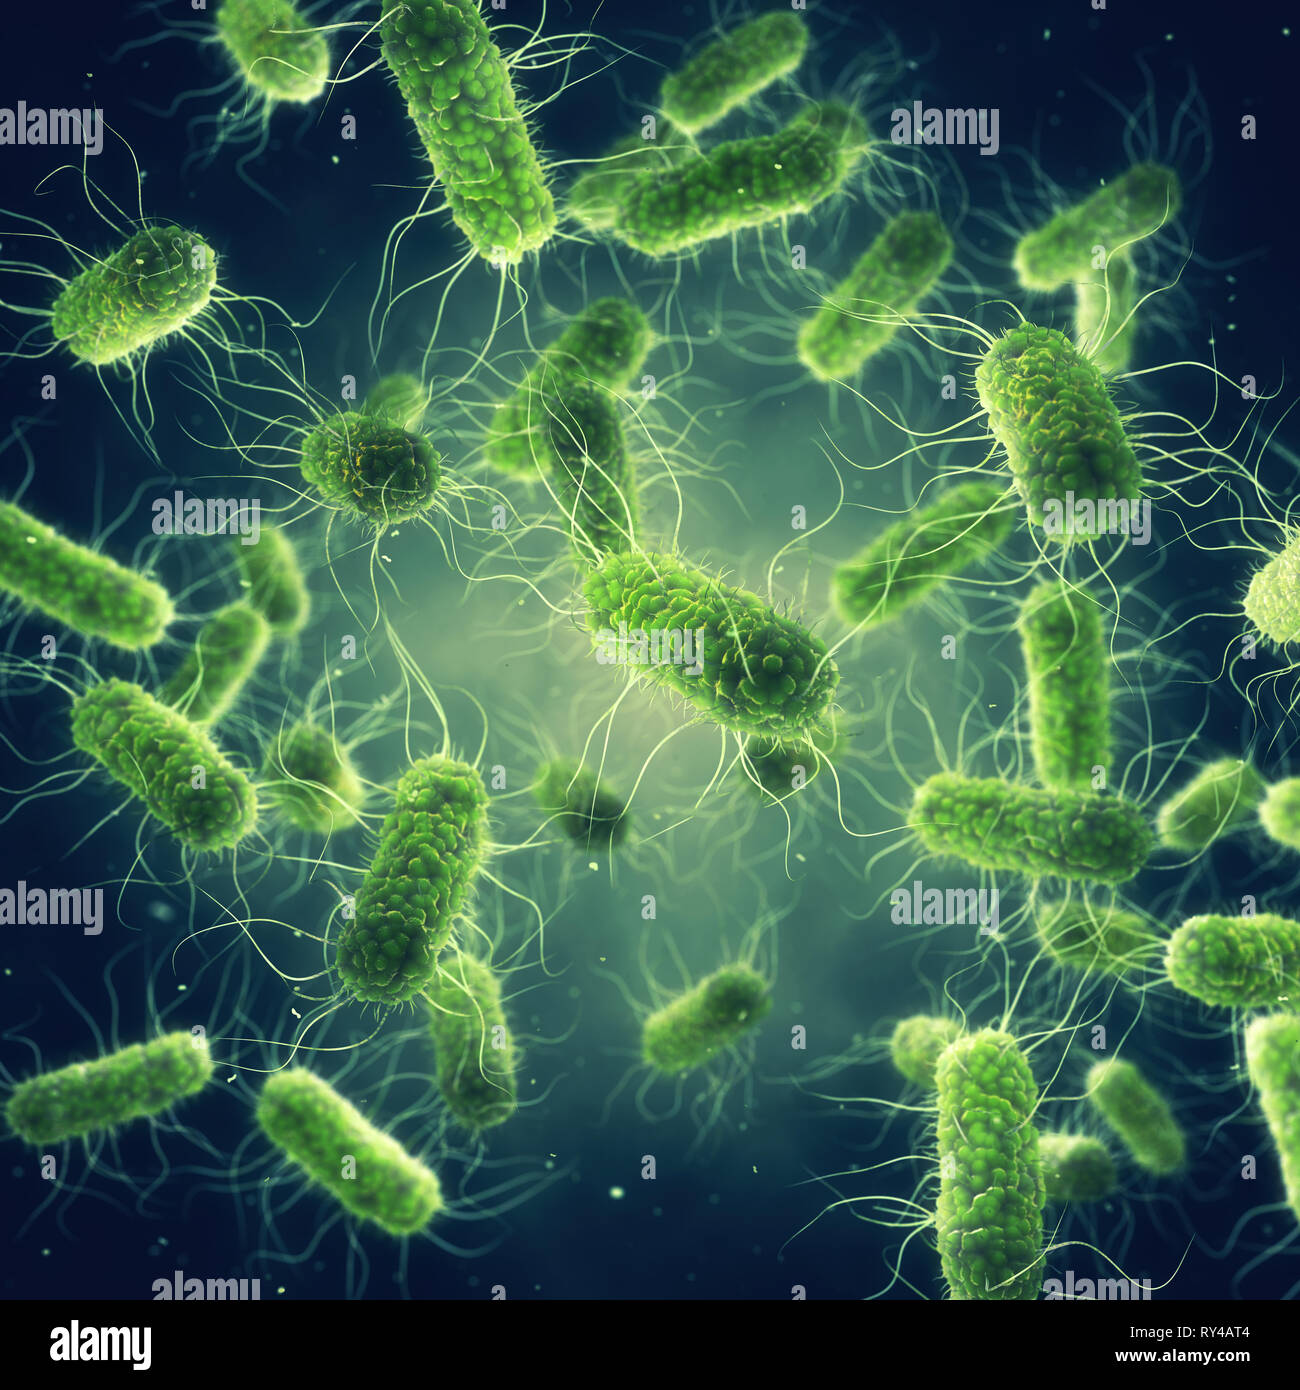 Pathogenic Salmonella Bacteria, Microbiological research Stock Photo